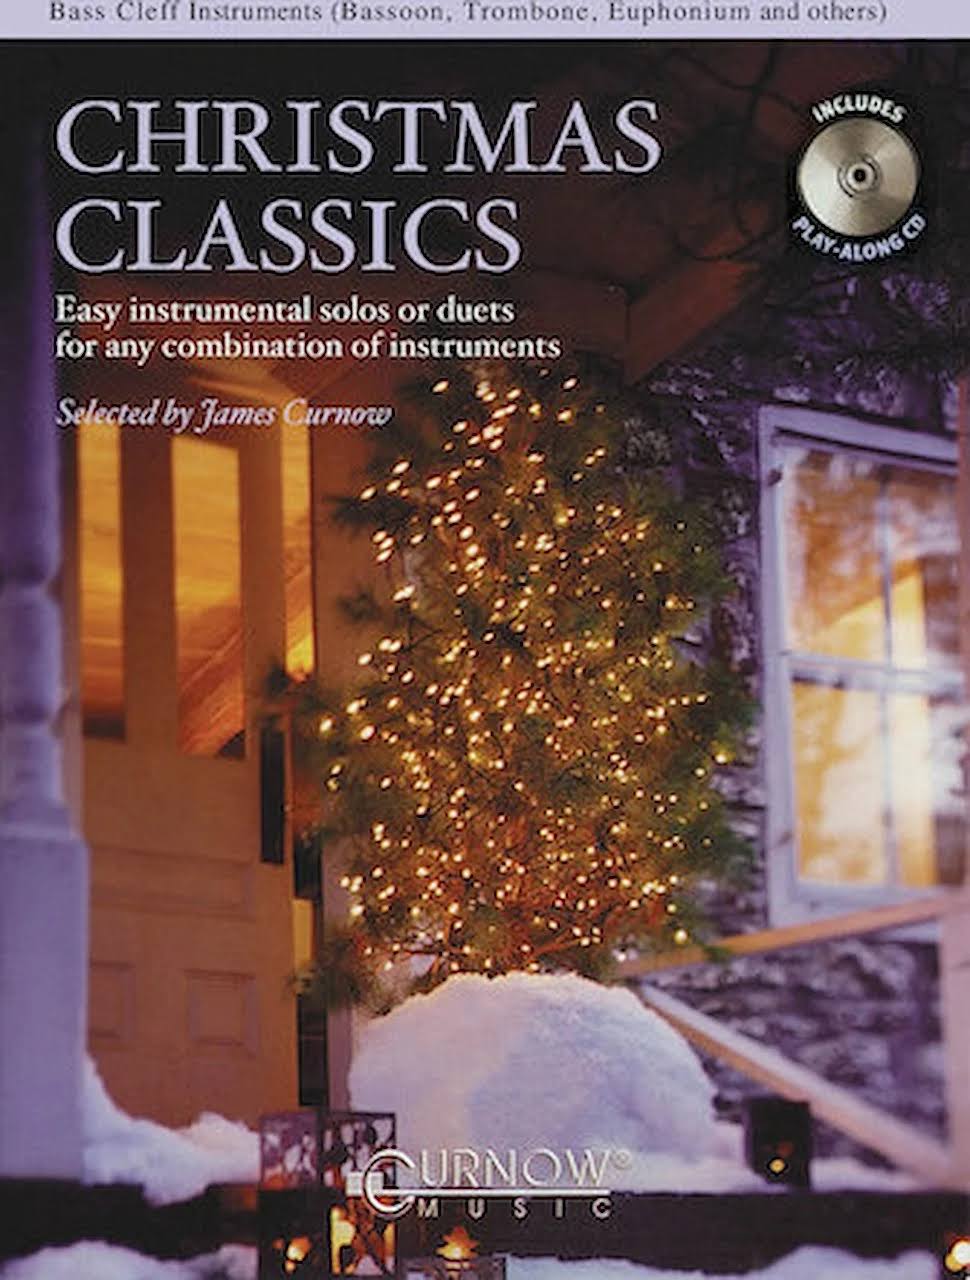 Christmas Classics - Easy Instrumental Solos or Duets for Any Combination of Instruments - Bass Clef Instrument Sheet Music